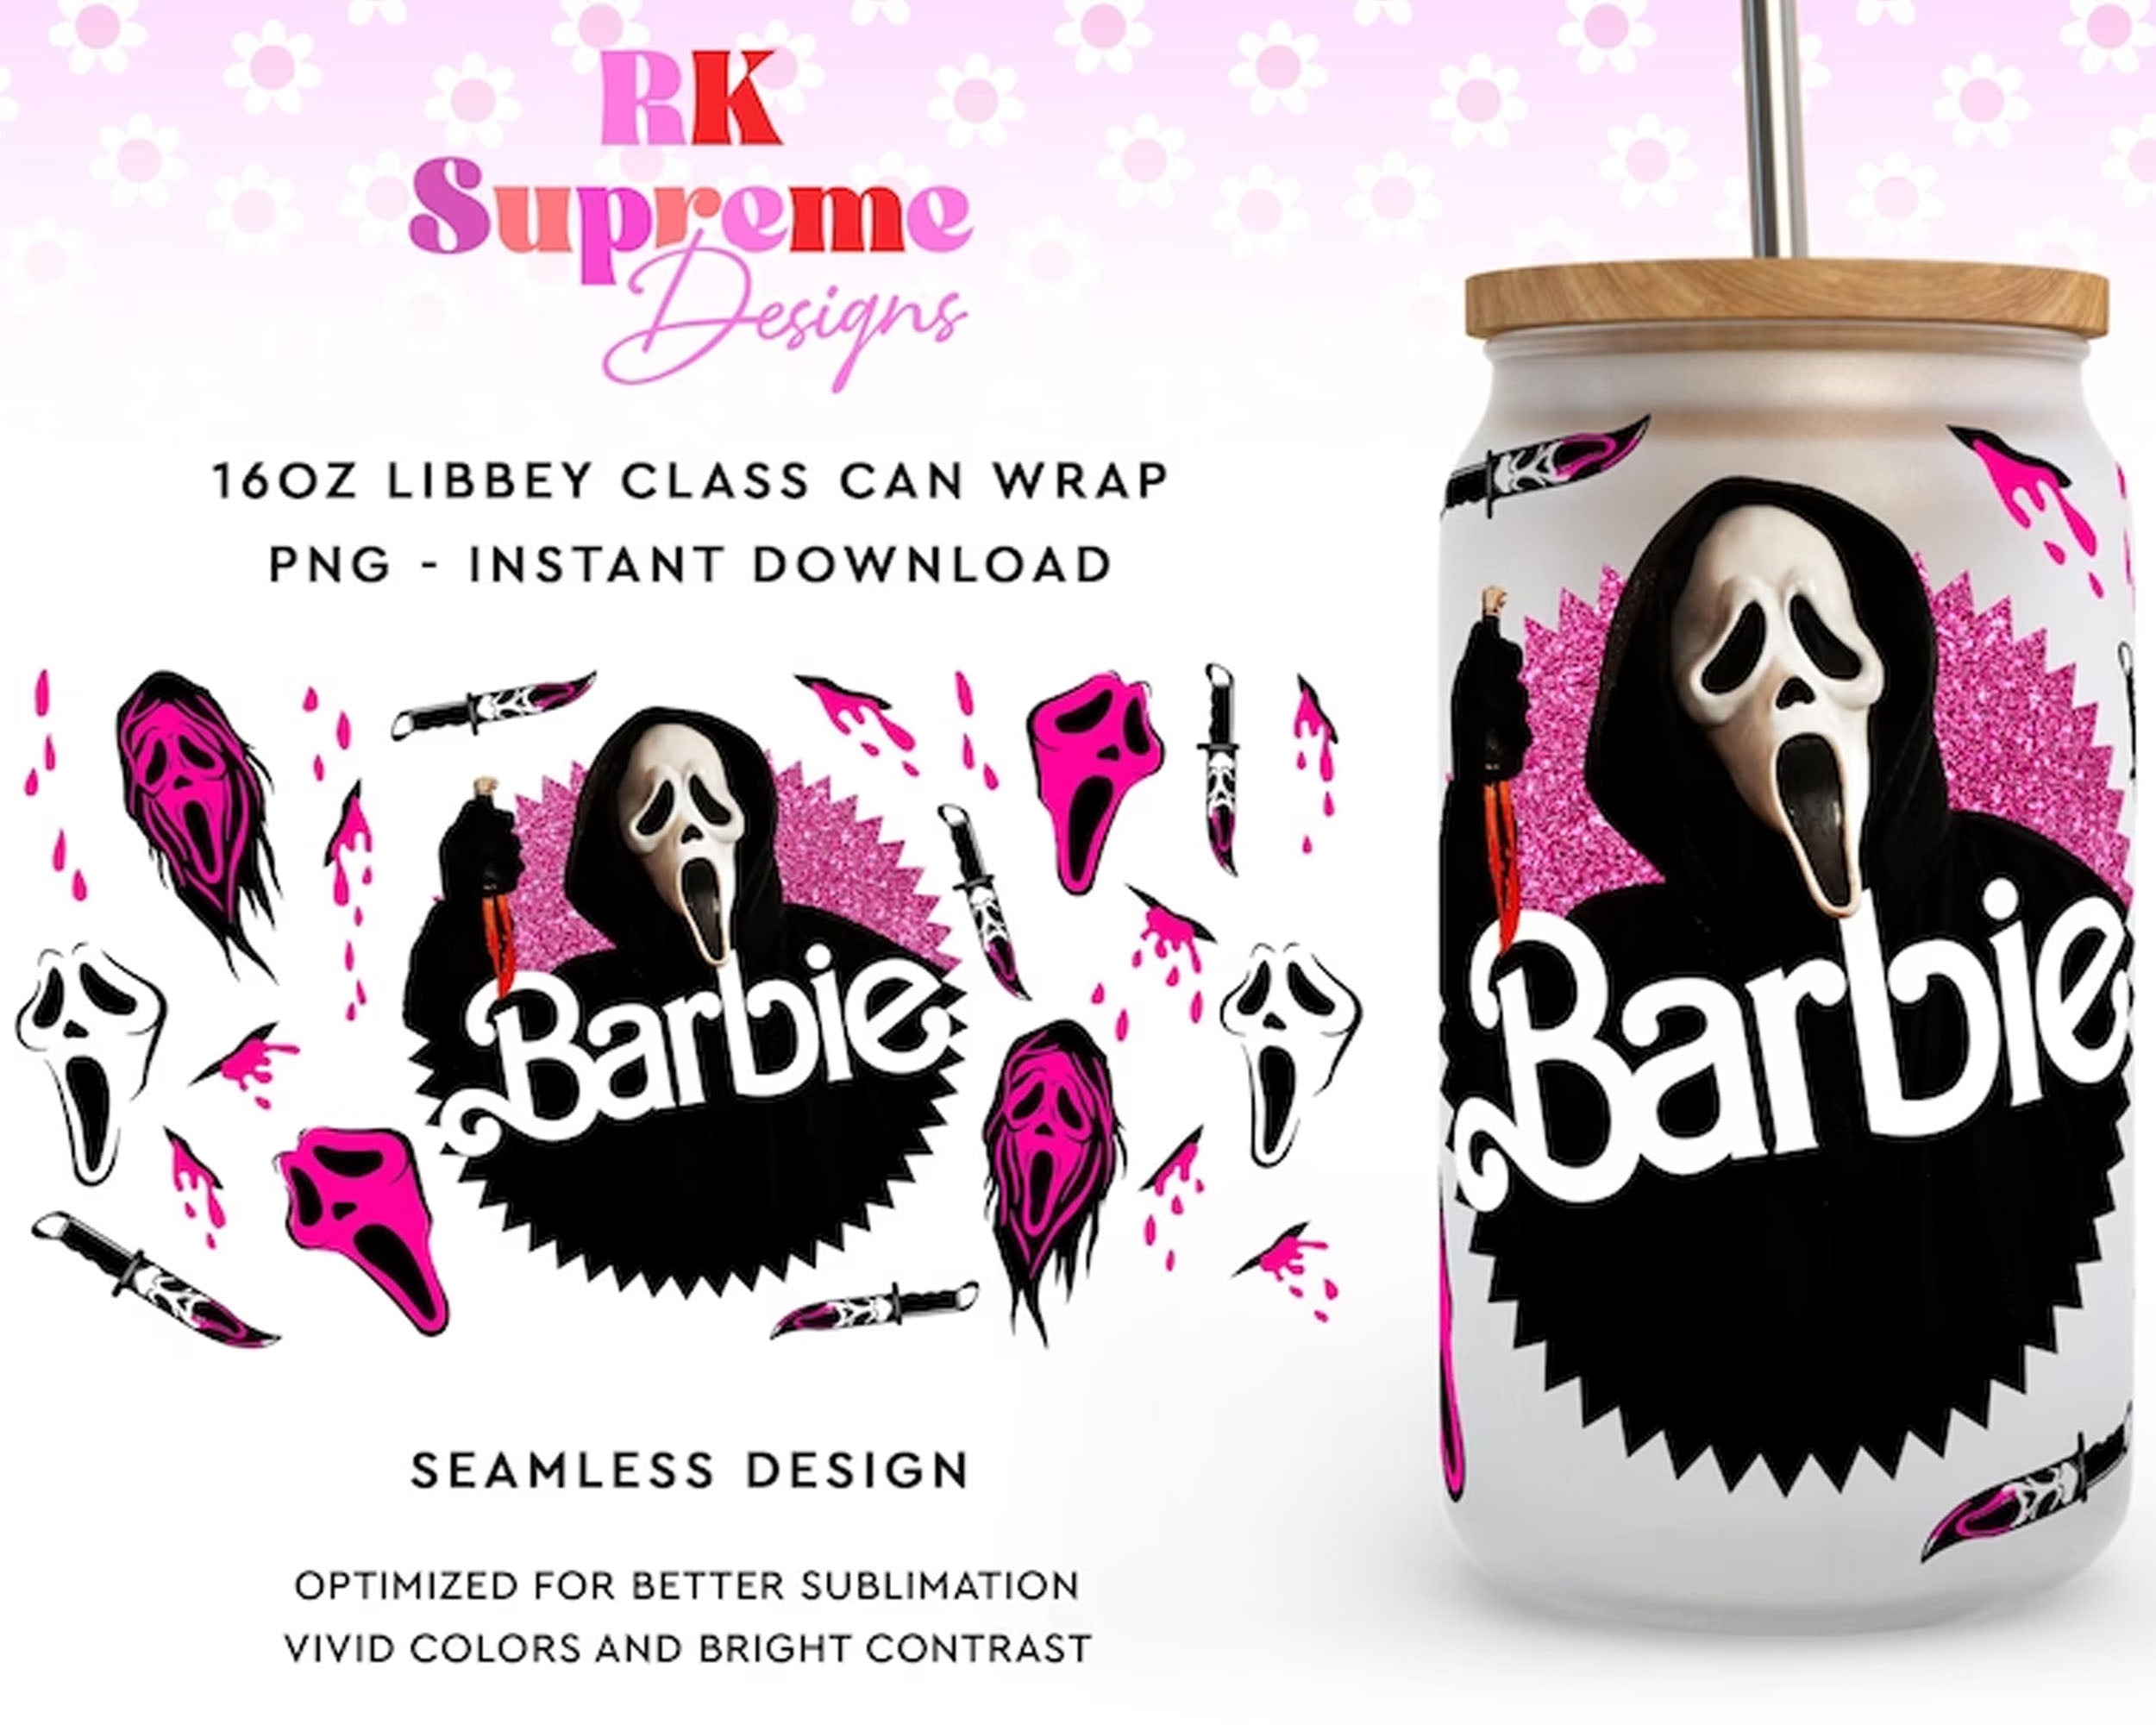 Ghostface Barbie Horror Movie Glass Wrap png, 16oz Libbey Glass Can Wrap PNG, Instant Download